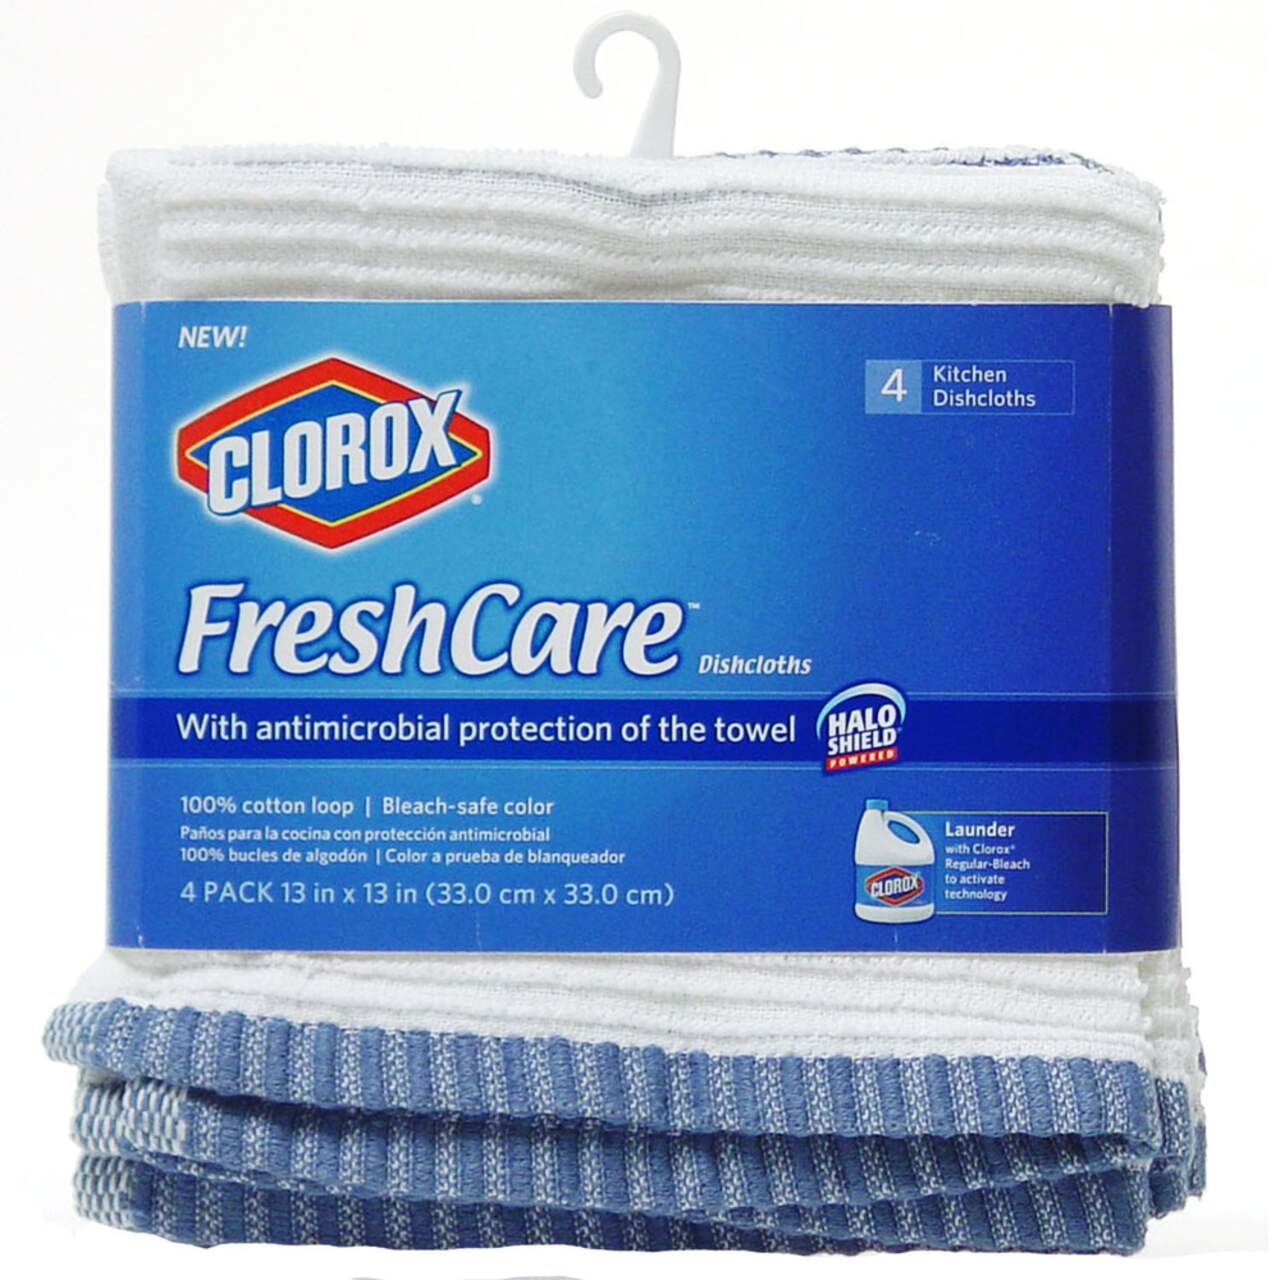 https://media-www.canadiantire.ca/product/living/kitchen/dining-and-entertaining/0425719/2-pack-of-clorox-13-x-13-terry-dish-cloths-06f386be-5ff8-4935-b7c5-434d8871695d.png?imdensity=1&imwidth=640&impolicy=mZoom